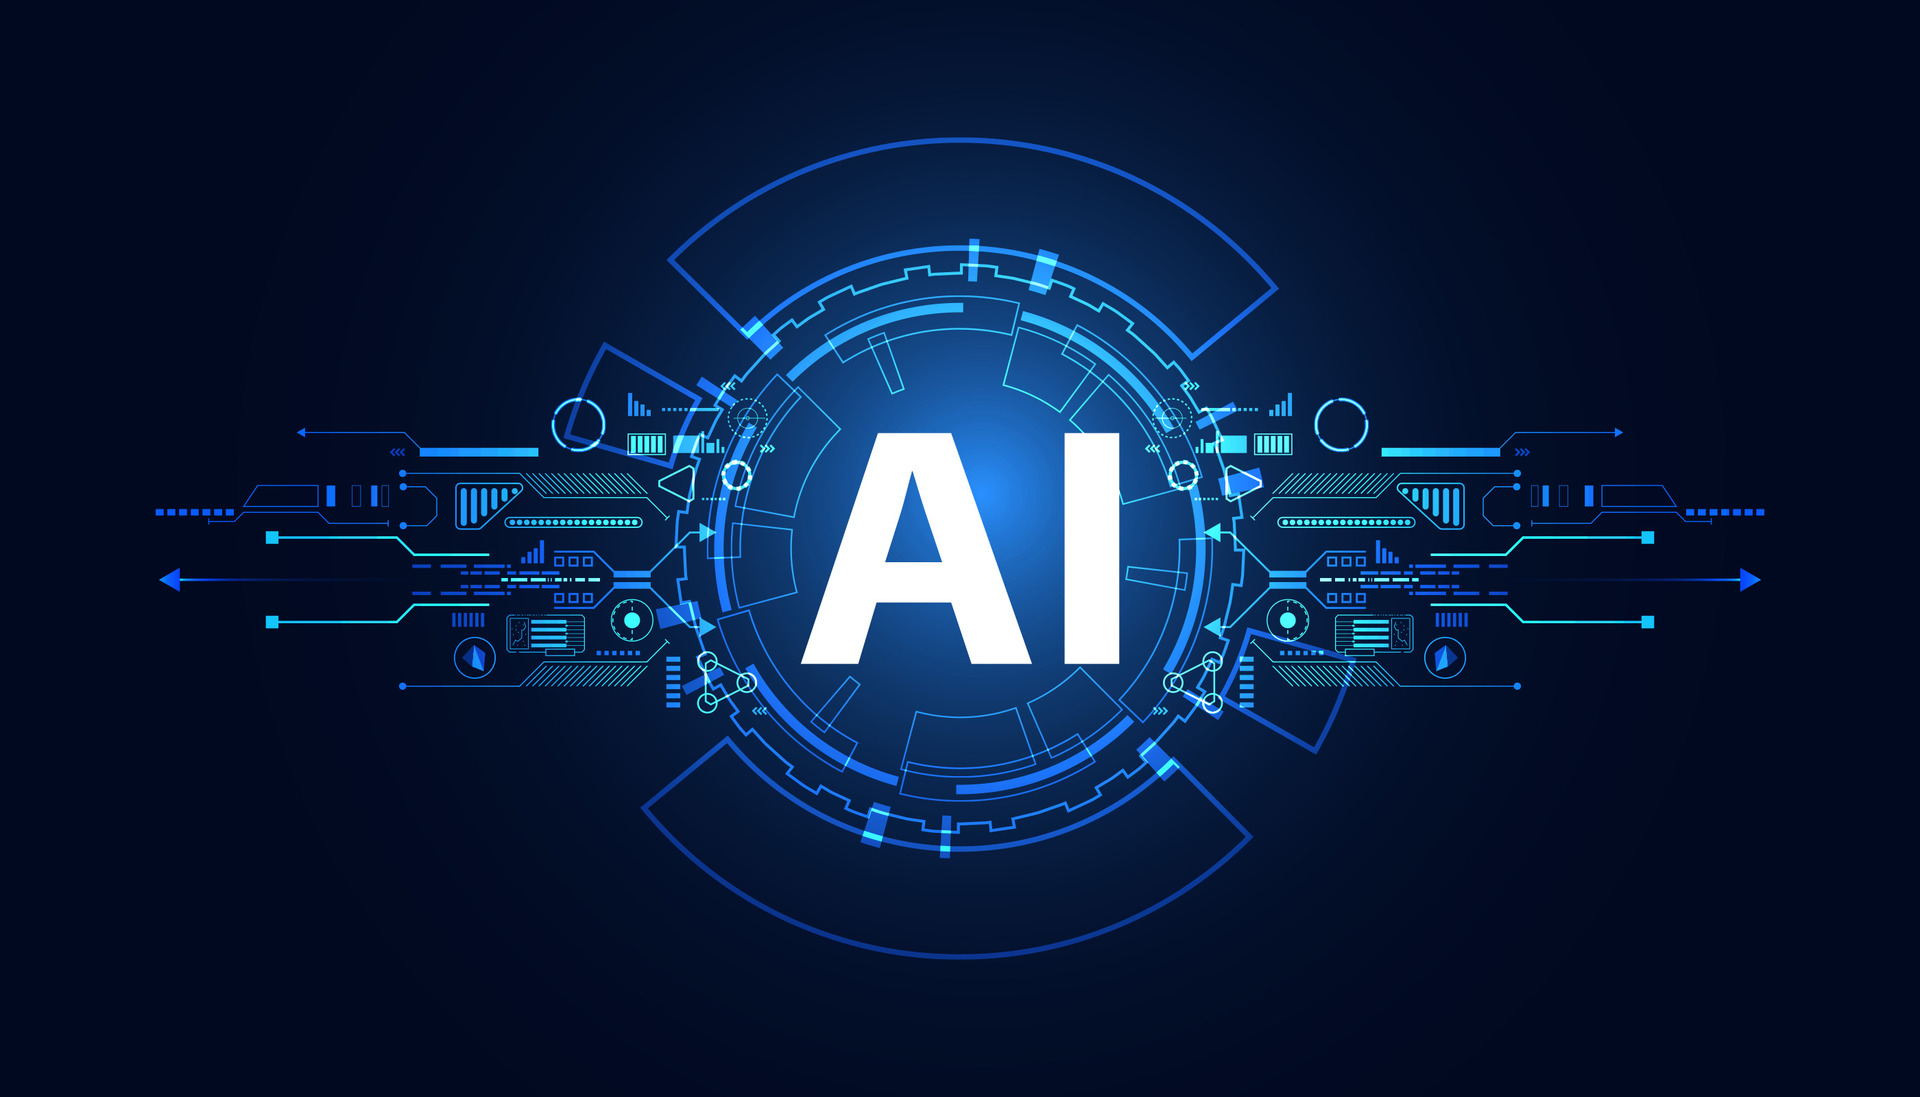 Enhancing Productivity and Streamlining Operations in Business Security through AI